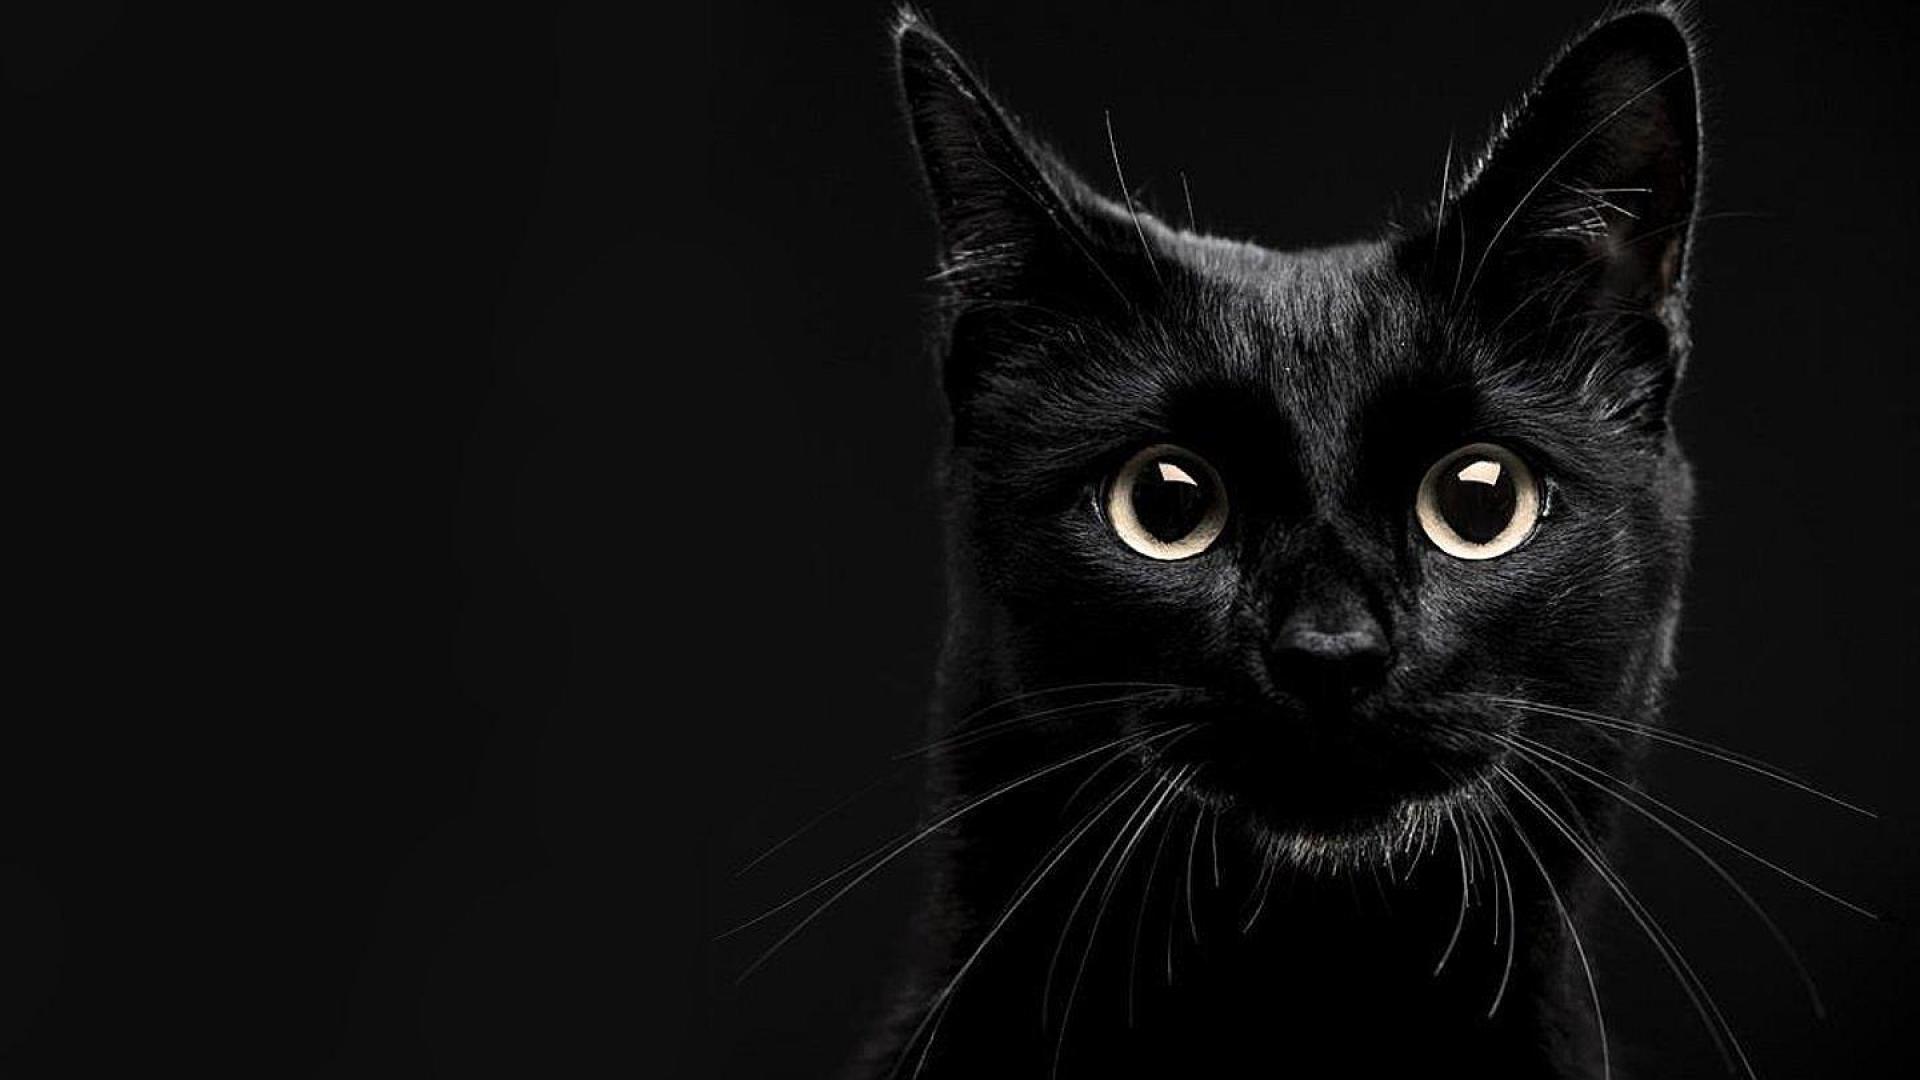 Black Cat Wallpaper   HD Wallpapers Backgrounds of Your Choice